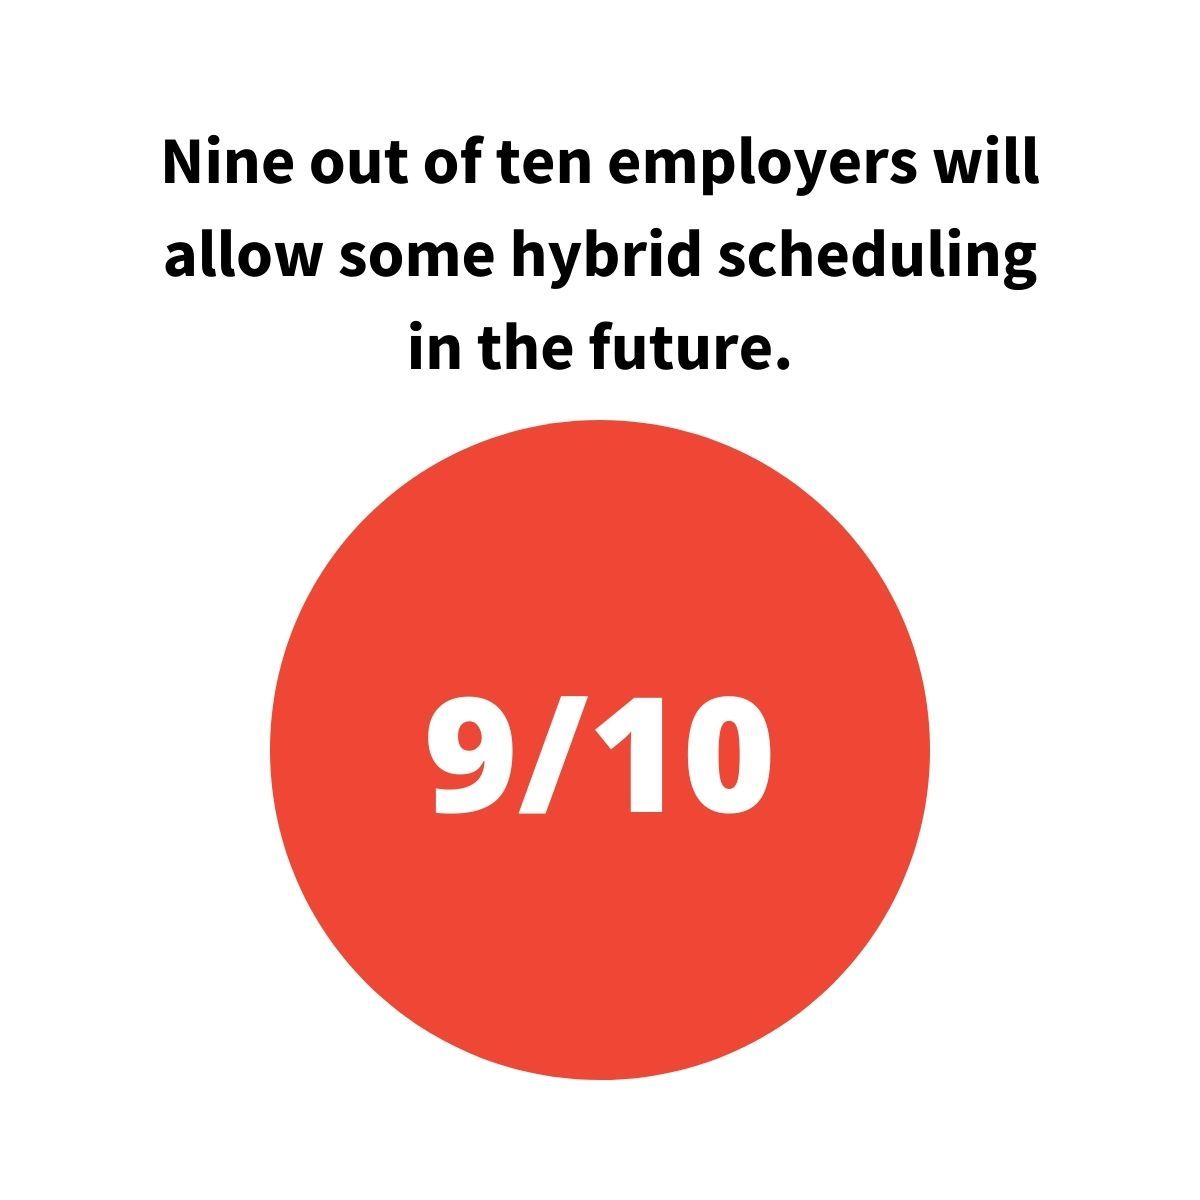 90 percent of employers will allow some hybrid work in the future